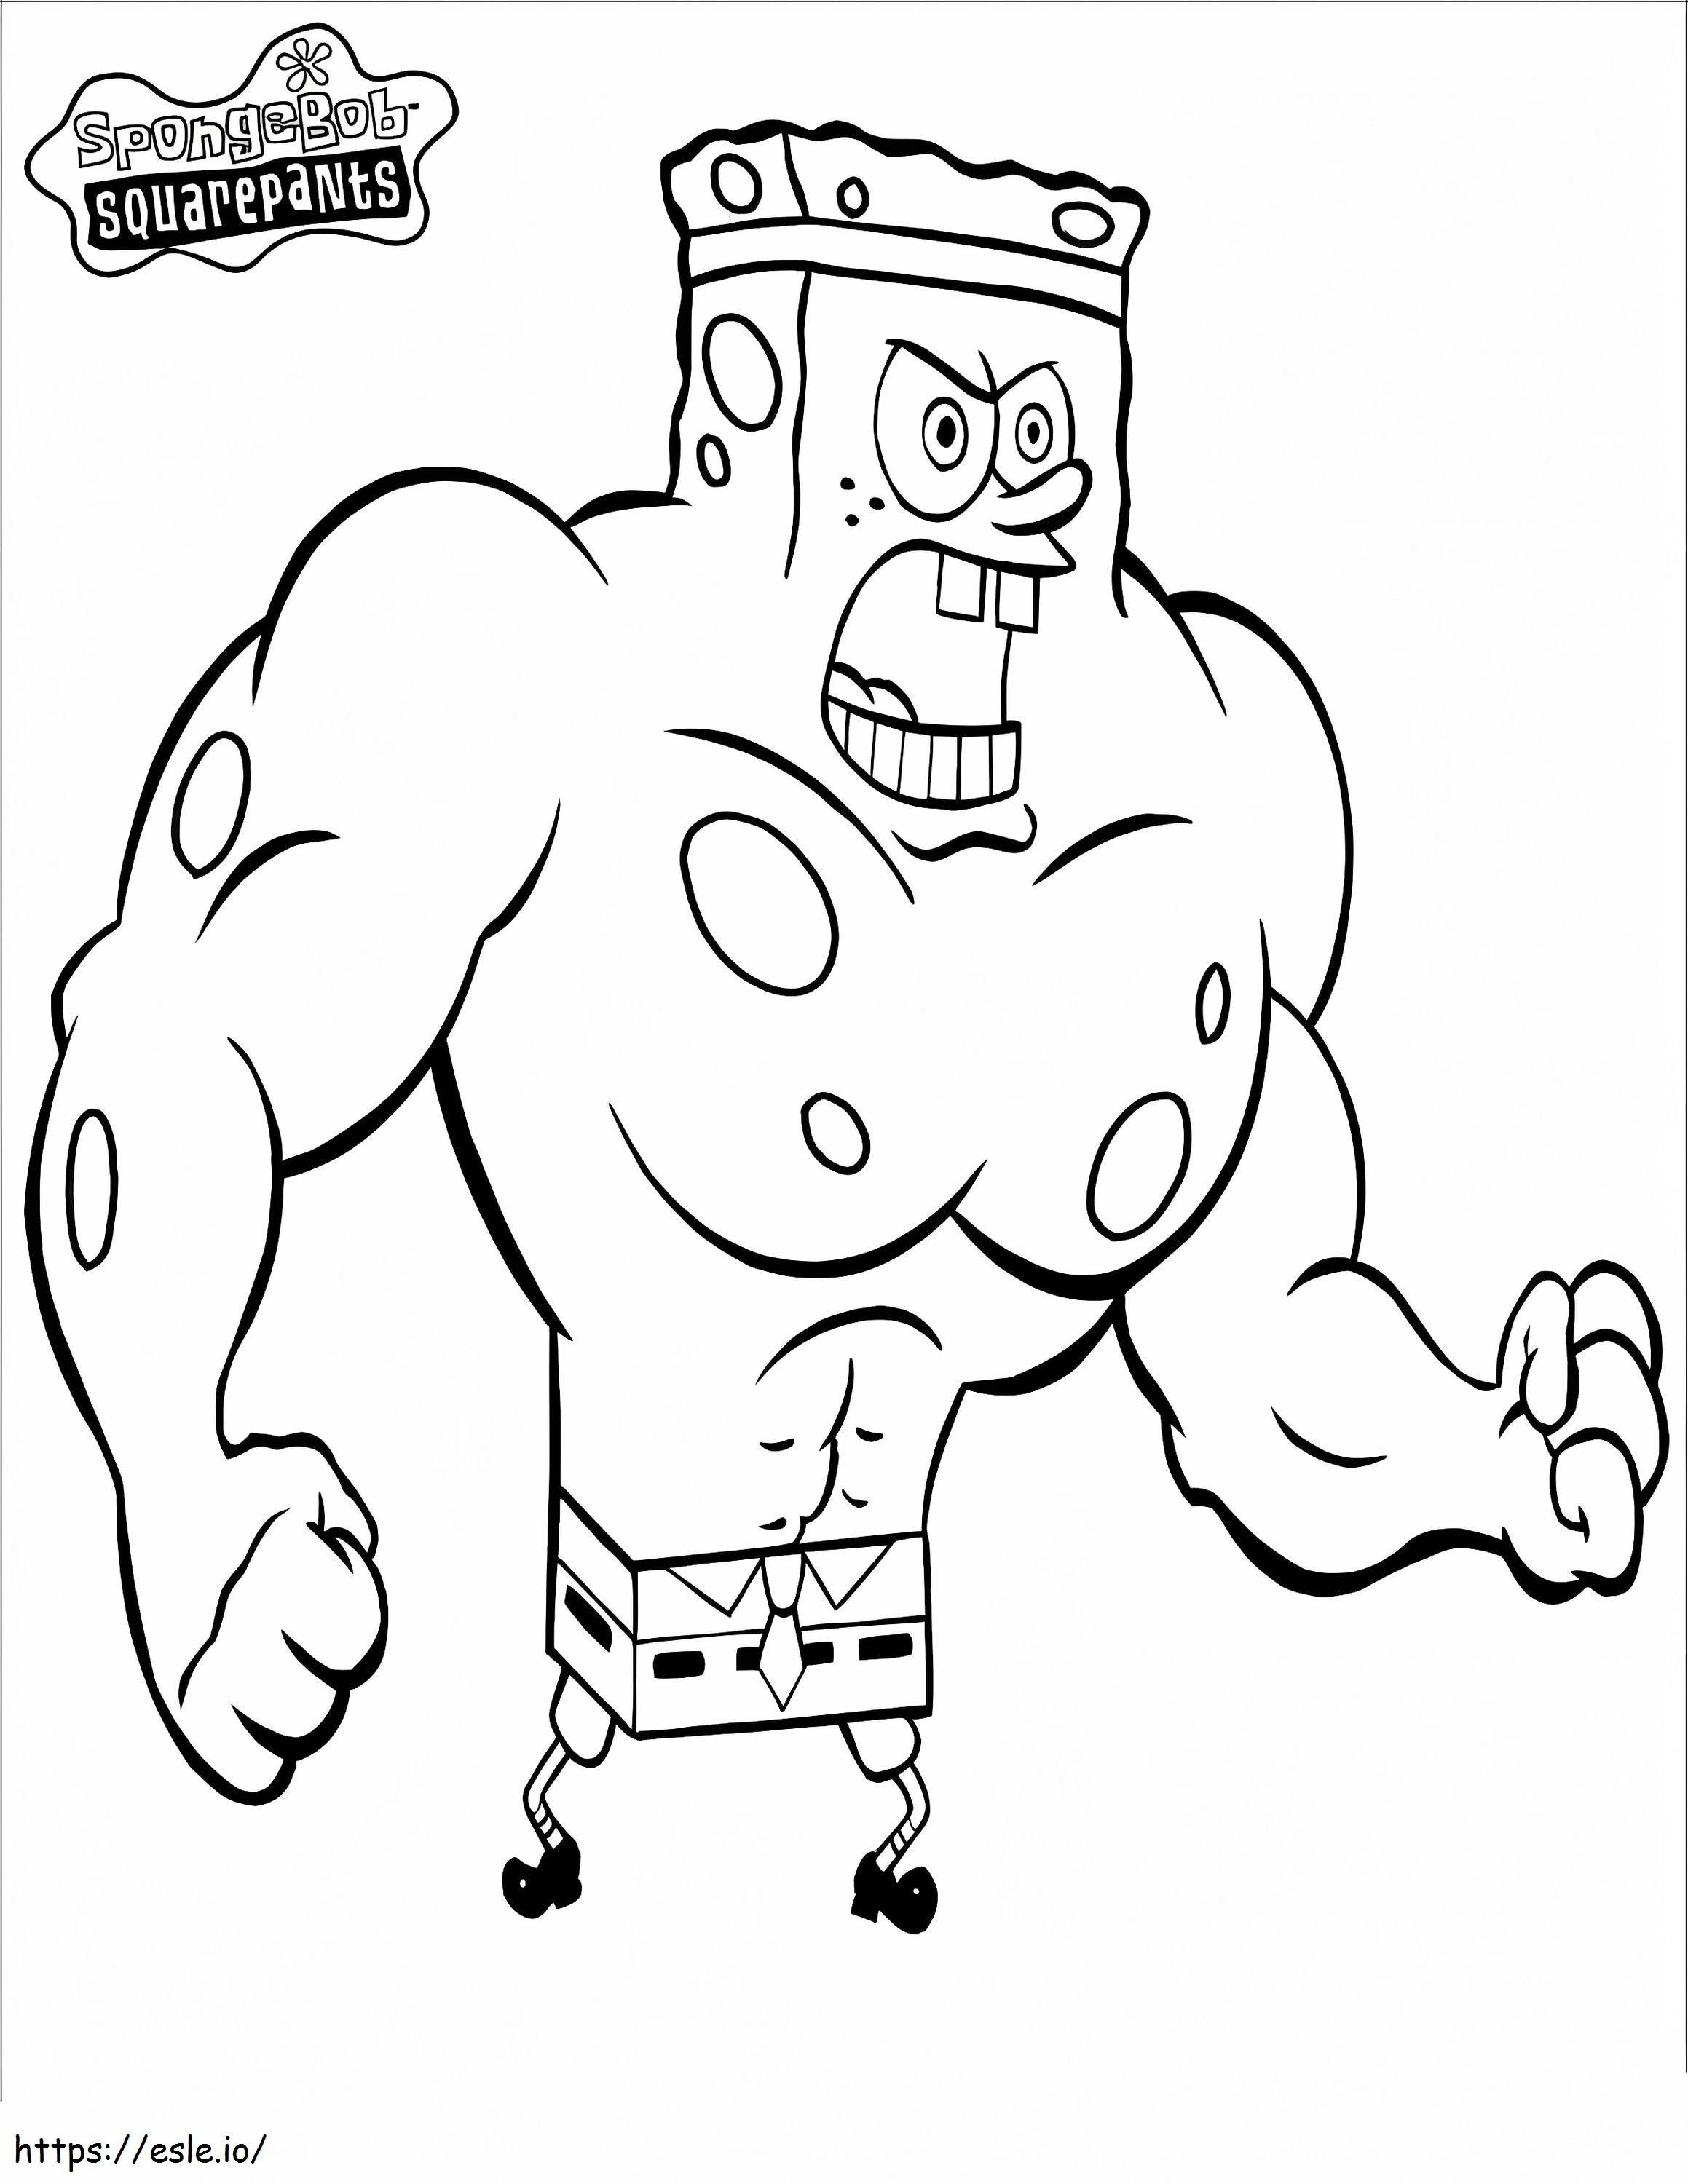 Muscle SpongeBob coloring page